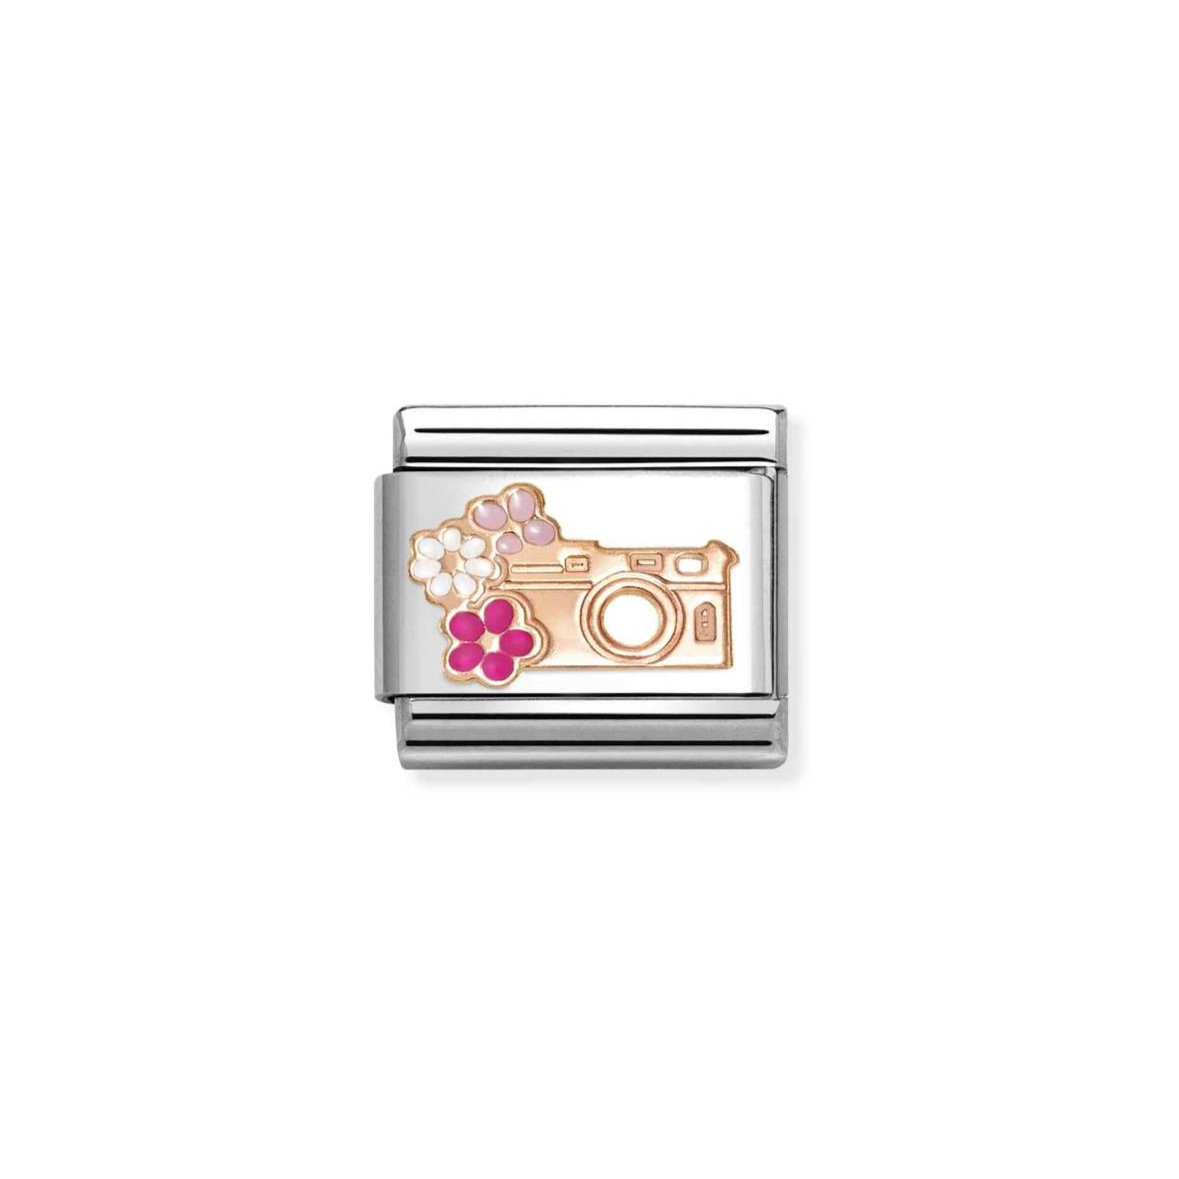 Nomination 9k Rose Gold and Enamel Camera with Flowers Charm 430202/31